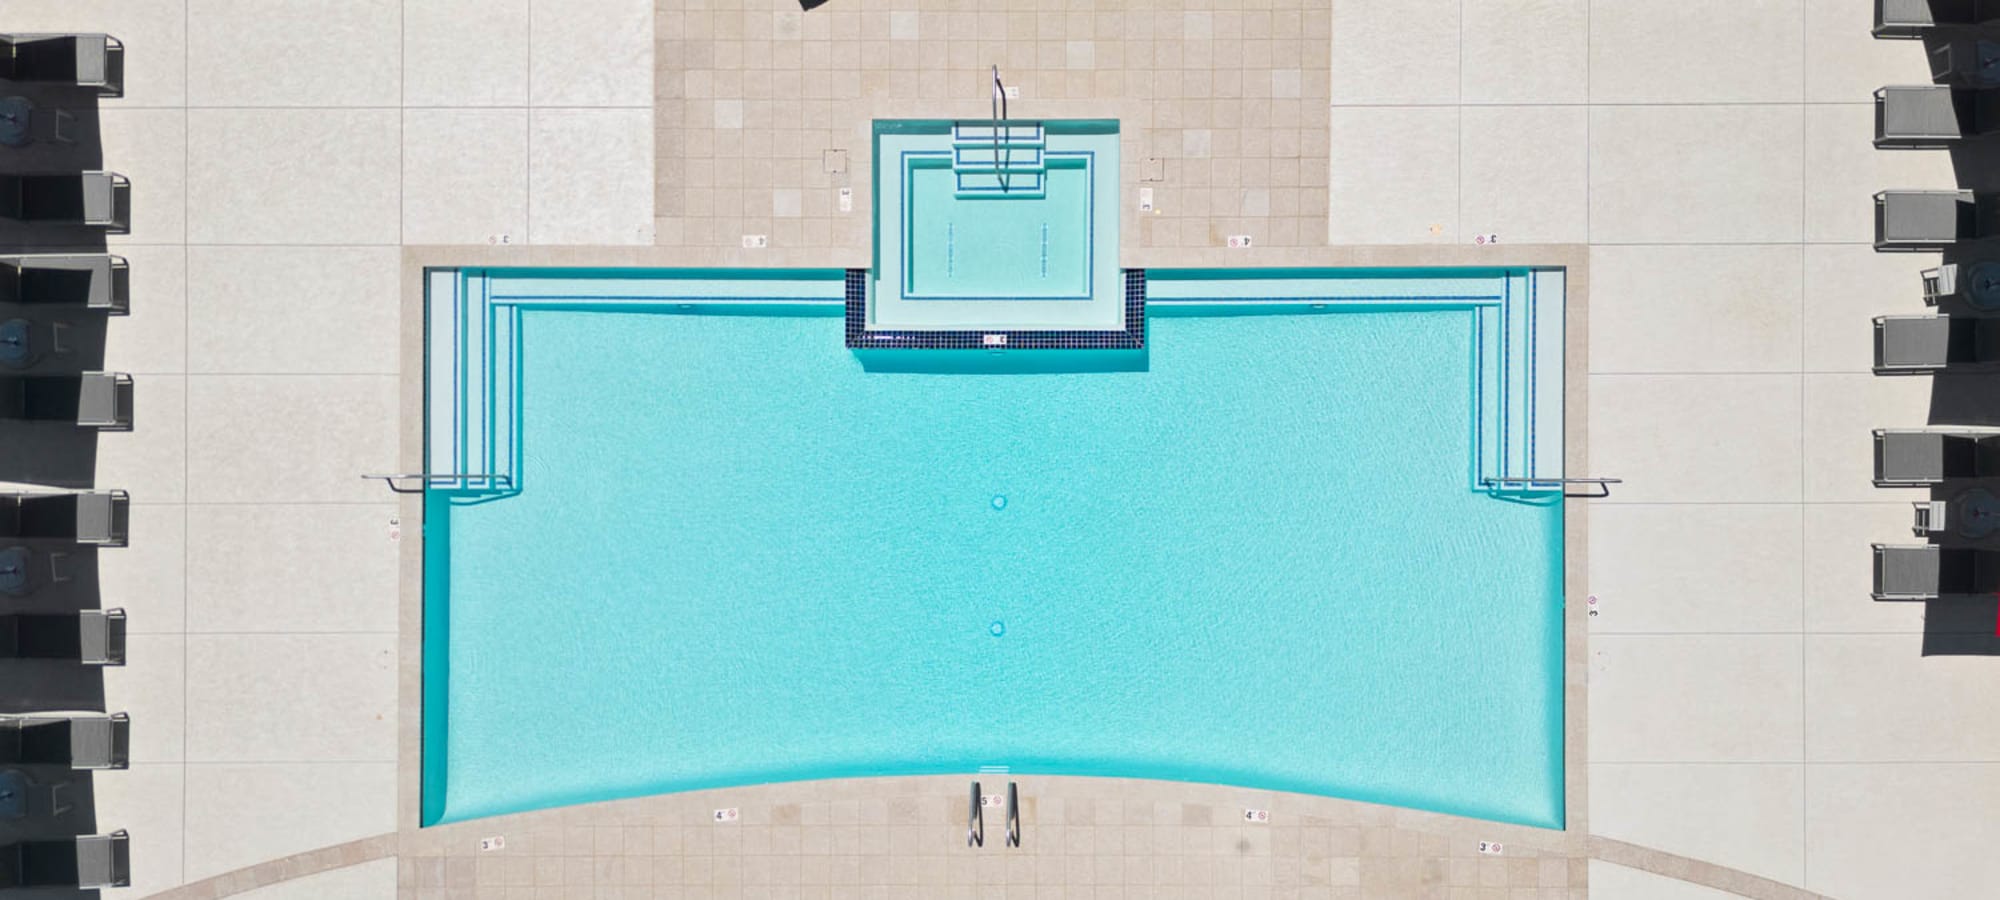 Aerial pool photo at Cottages at McDowell in Avondale, Arizona